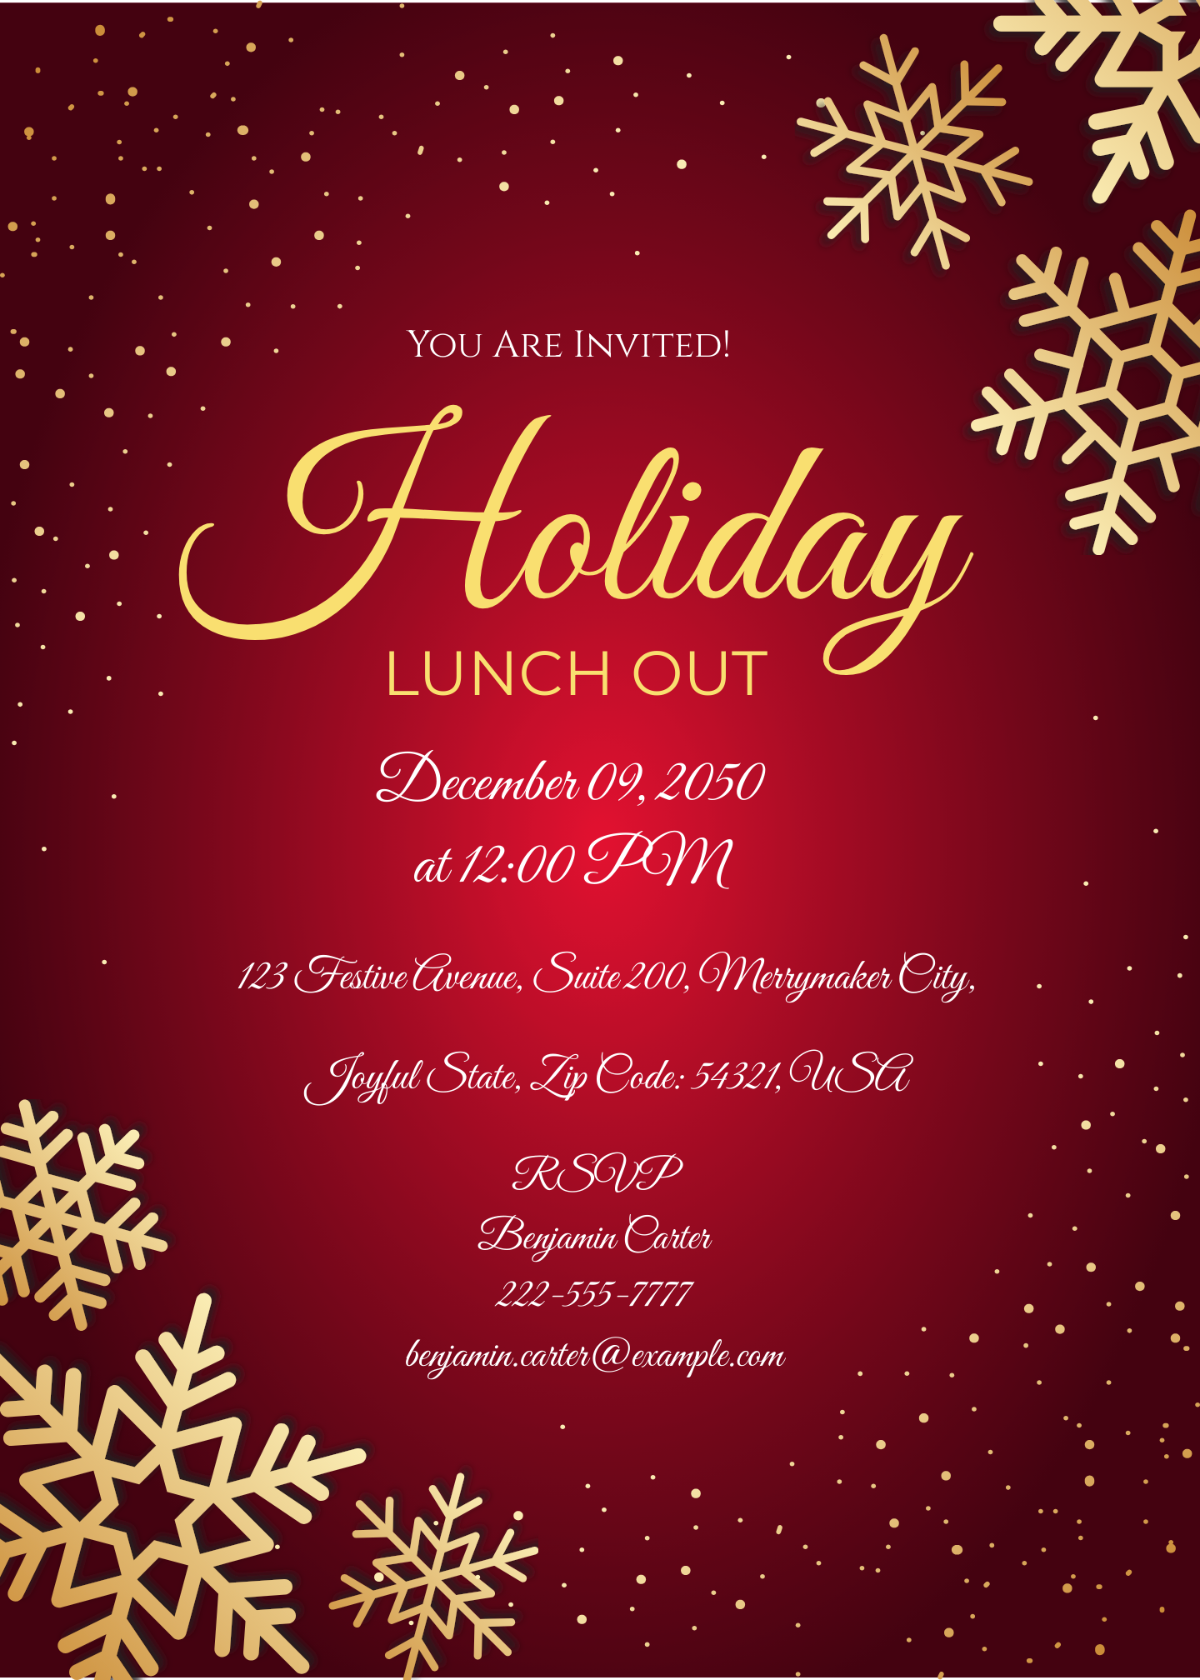 Holiday Lunch Invitation